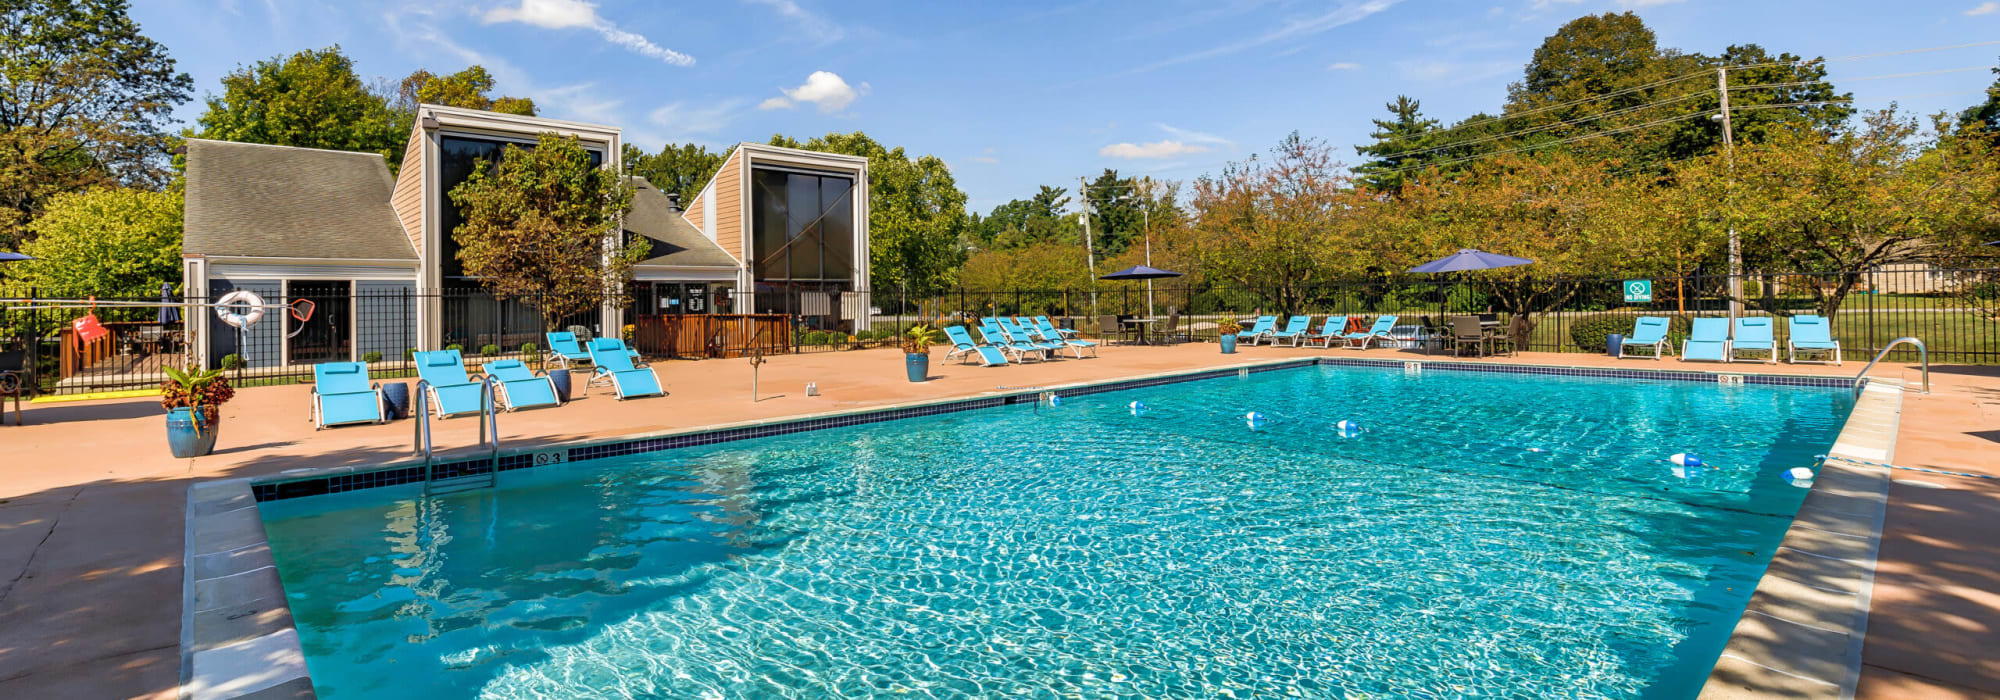 Amenities at Southport at Buck Creek in Indianapolis, Indiana